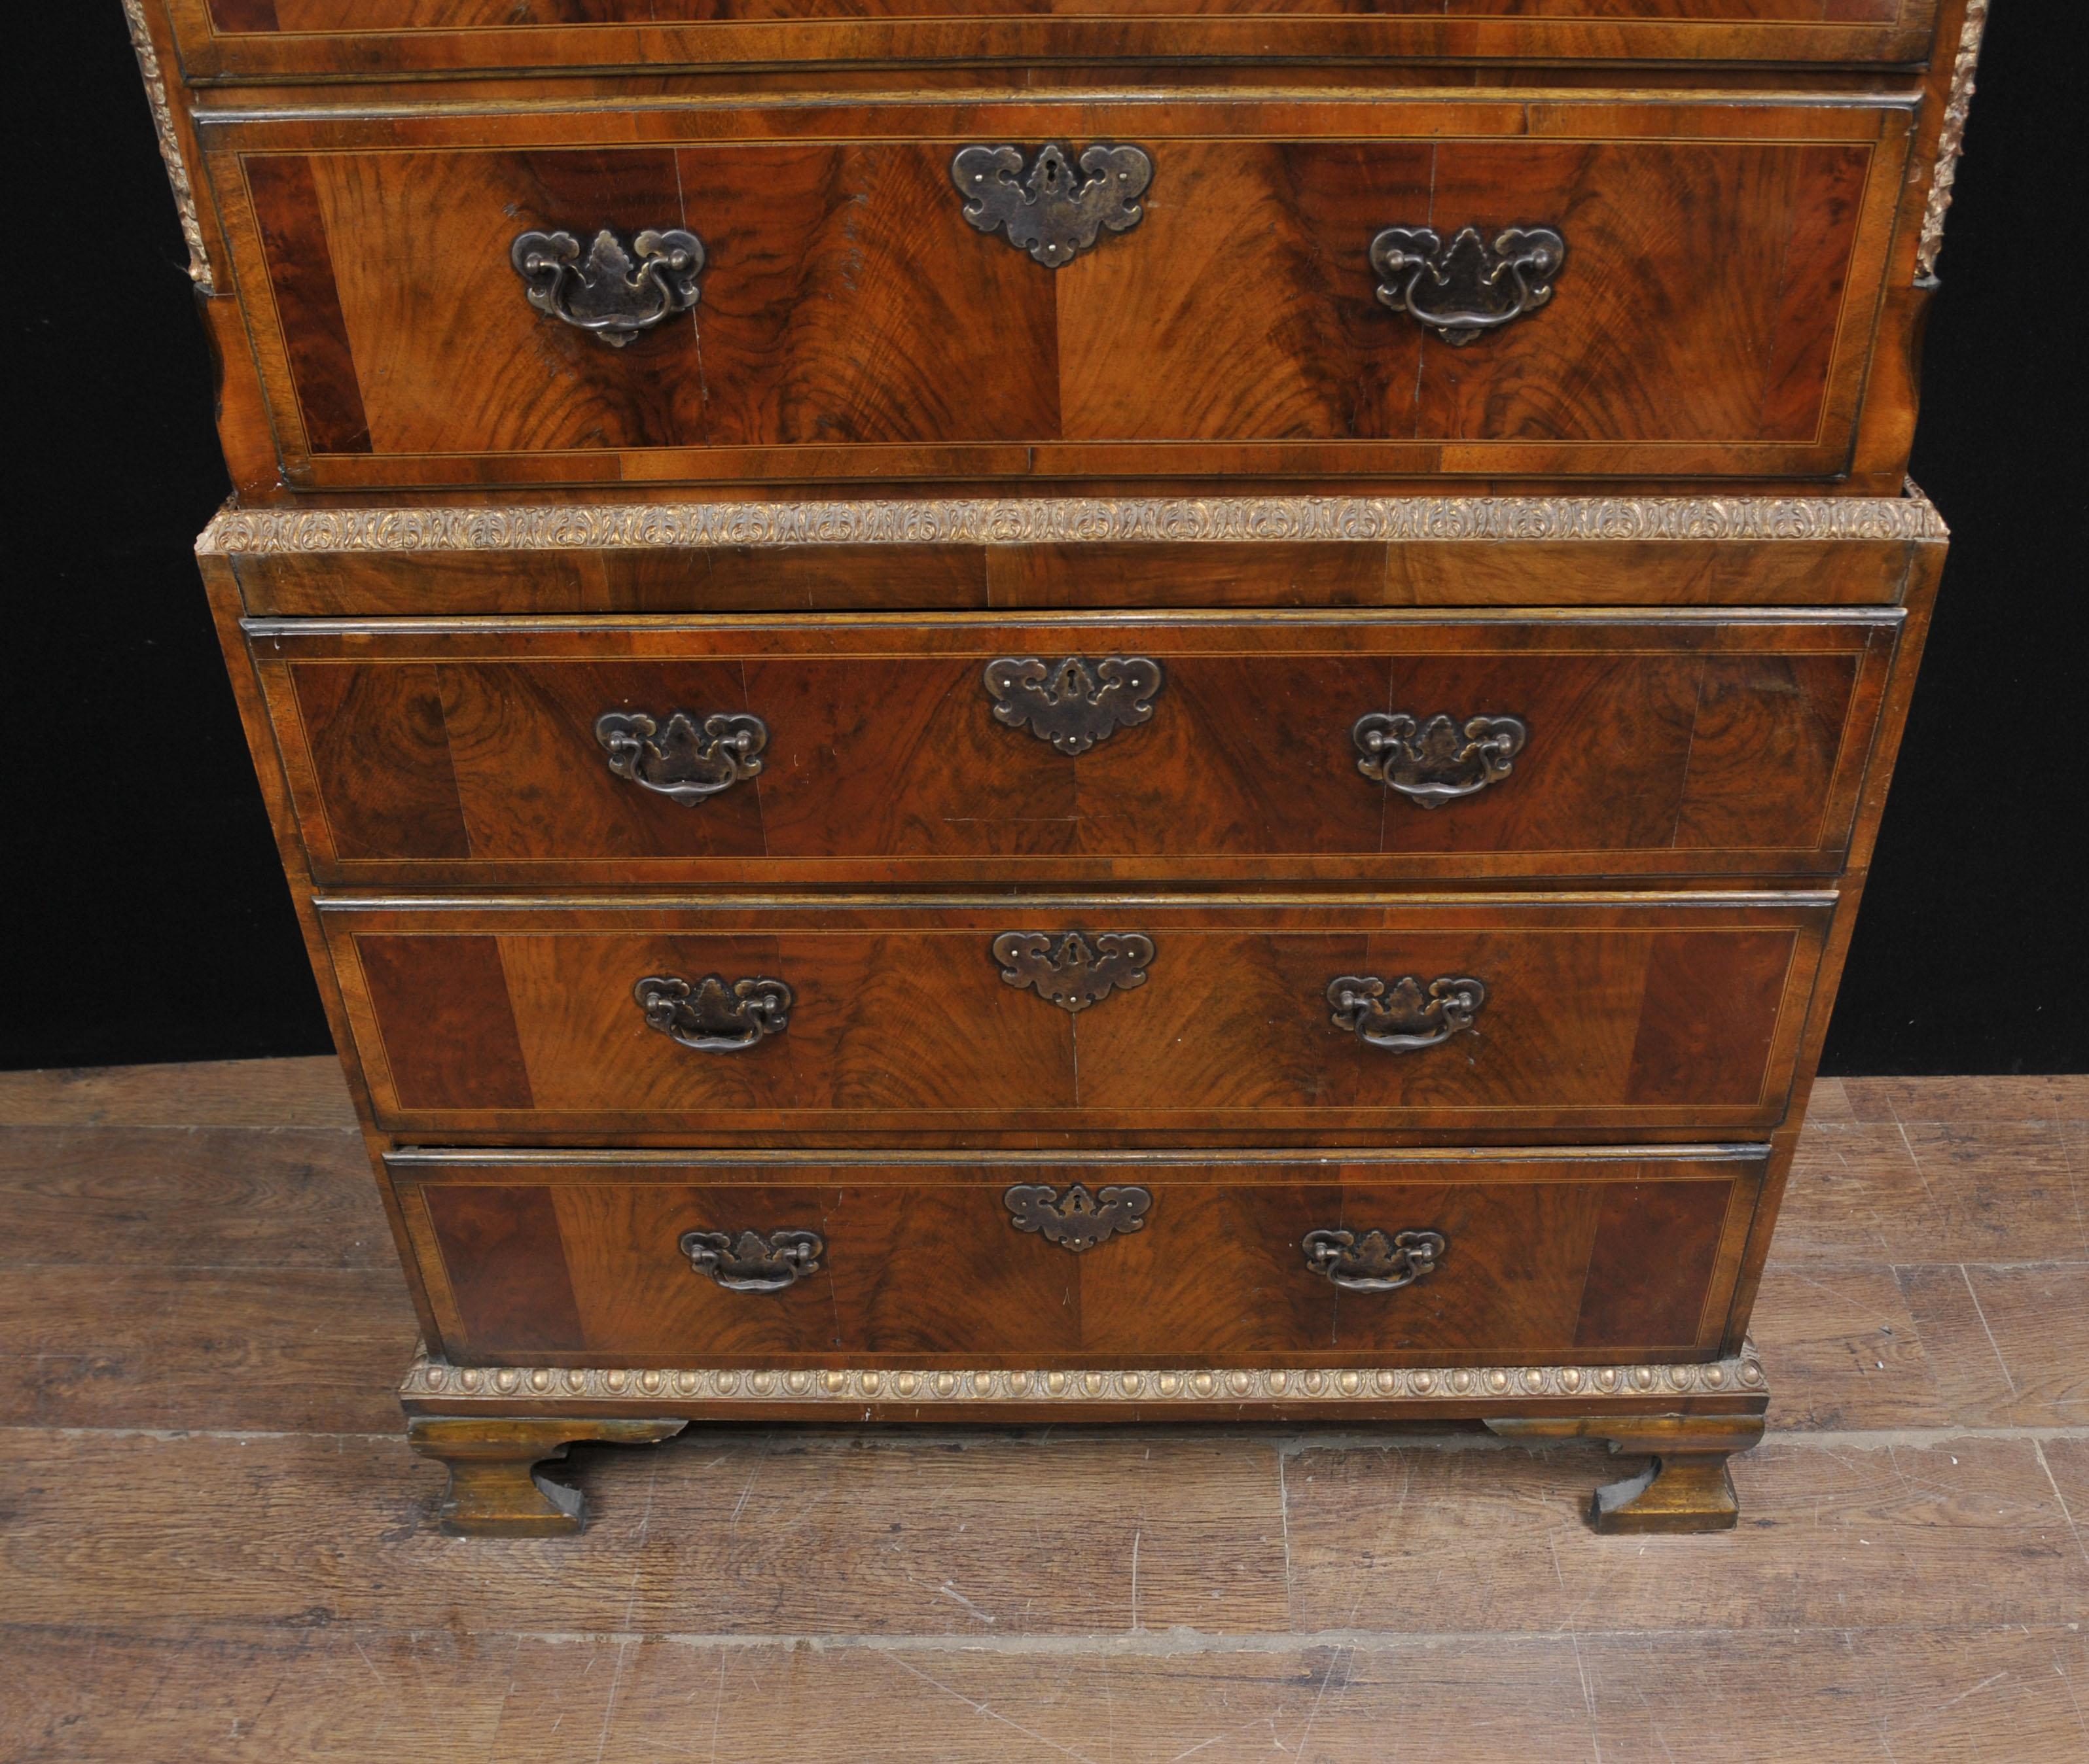 High Victorian Impressive Sized English Burl Walnut Chest on Chest Dating to 1840 Standing For Sale